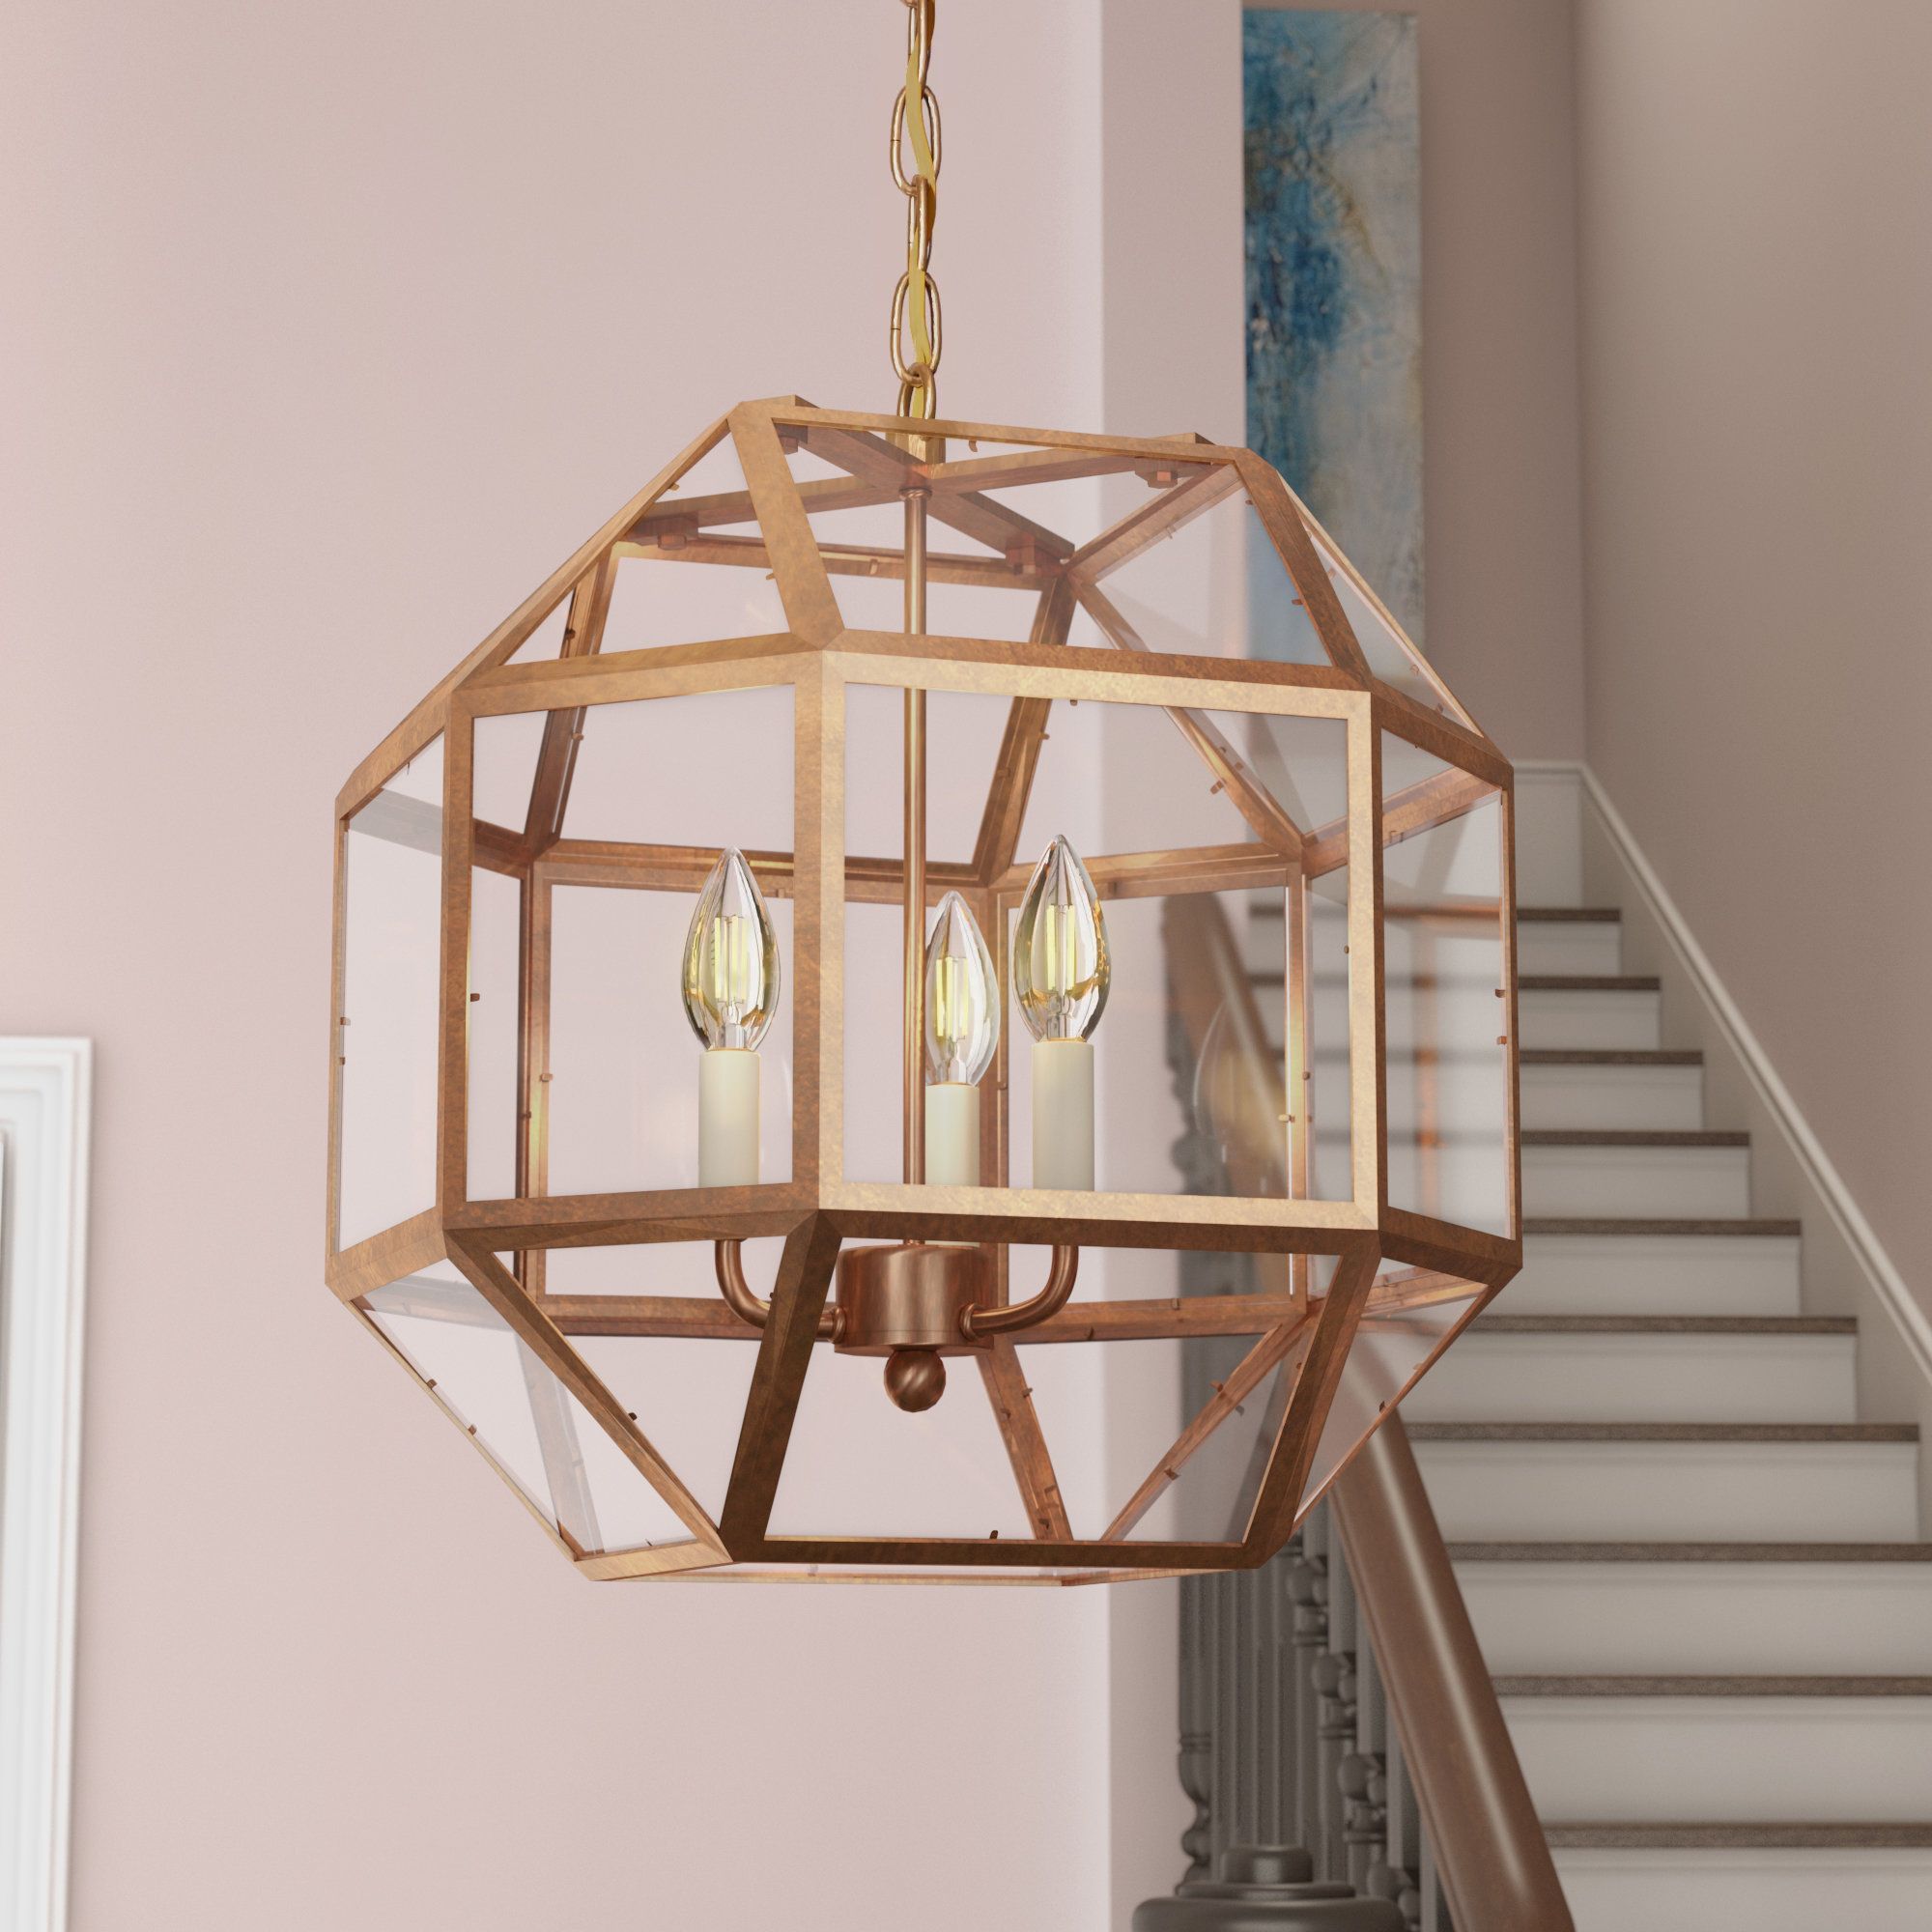 Geometric Chandeliers Sale – Up To 65% Off Until September Within Tabit 5 Light Geometric Chandeliers (View 18 of 30)